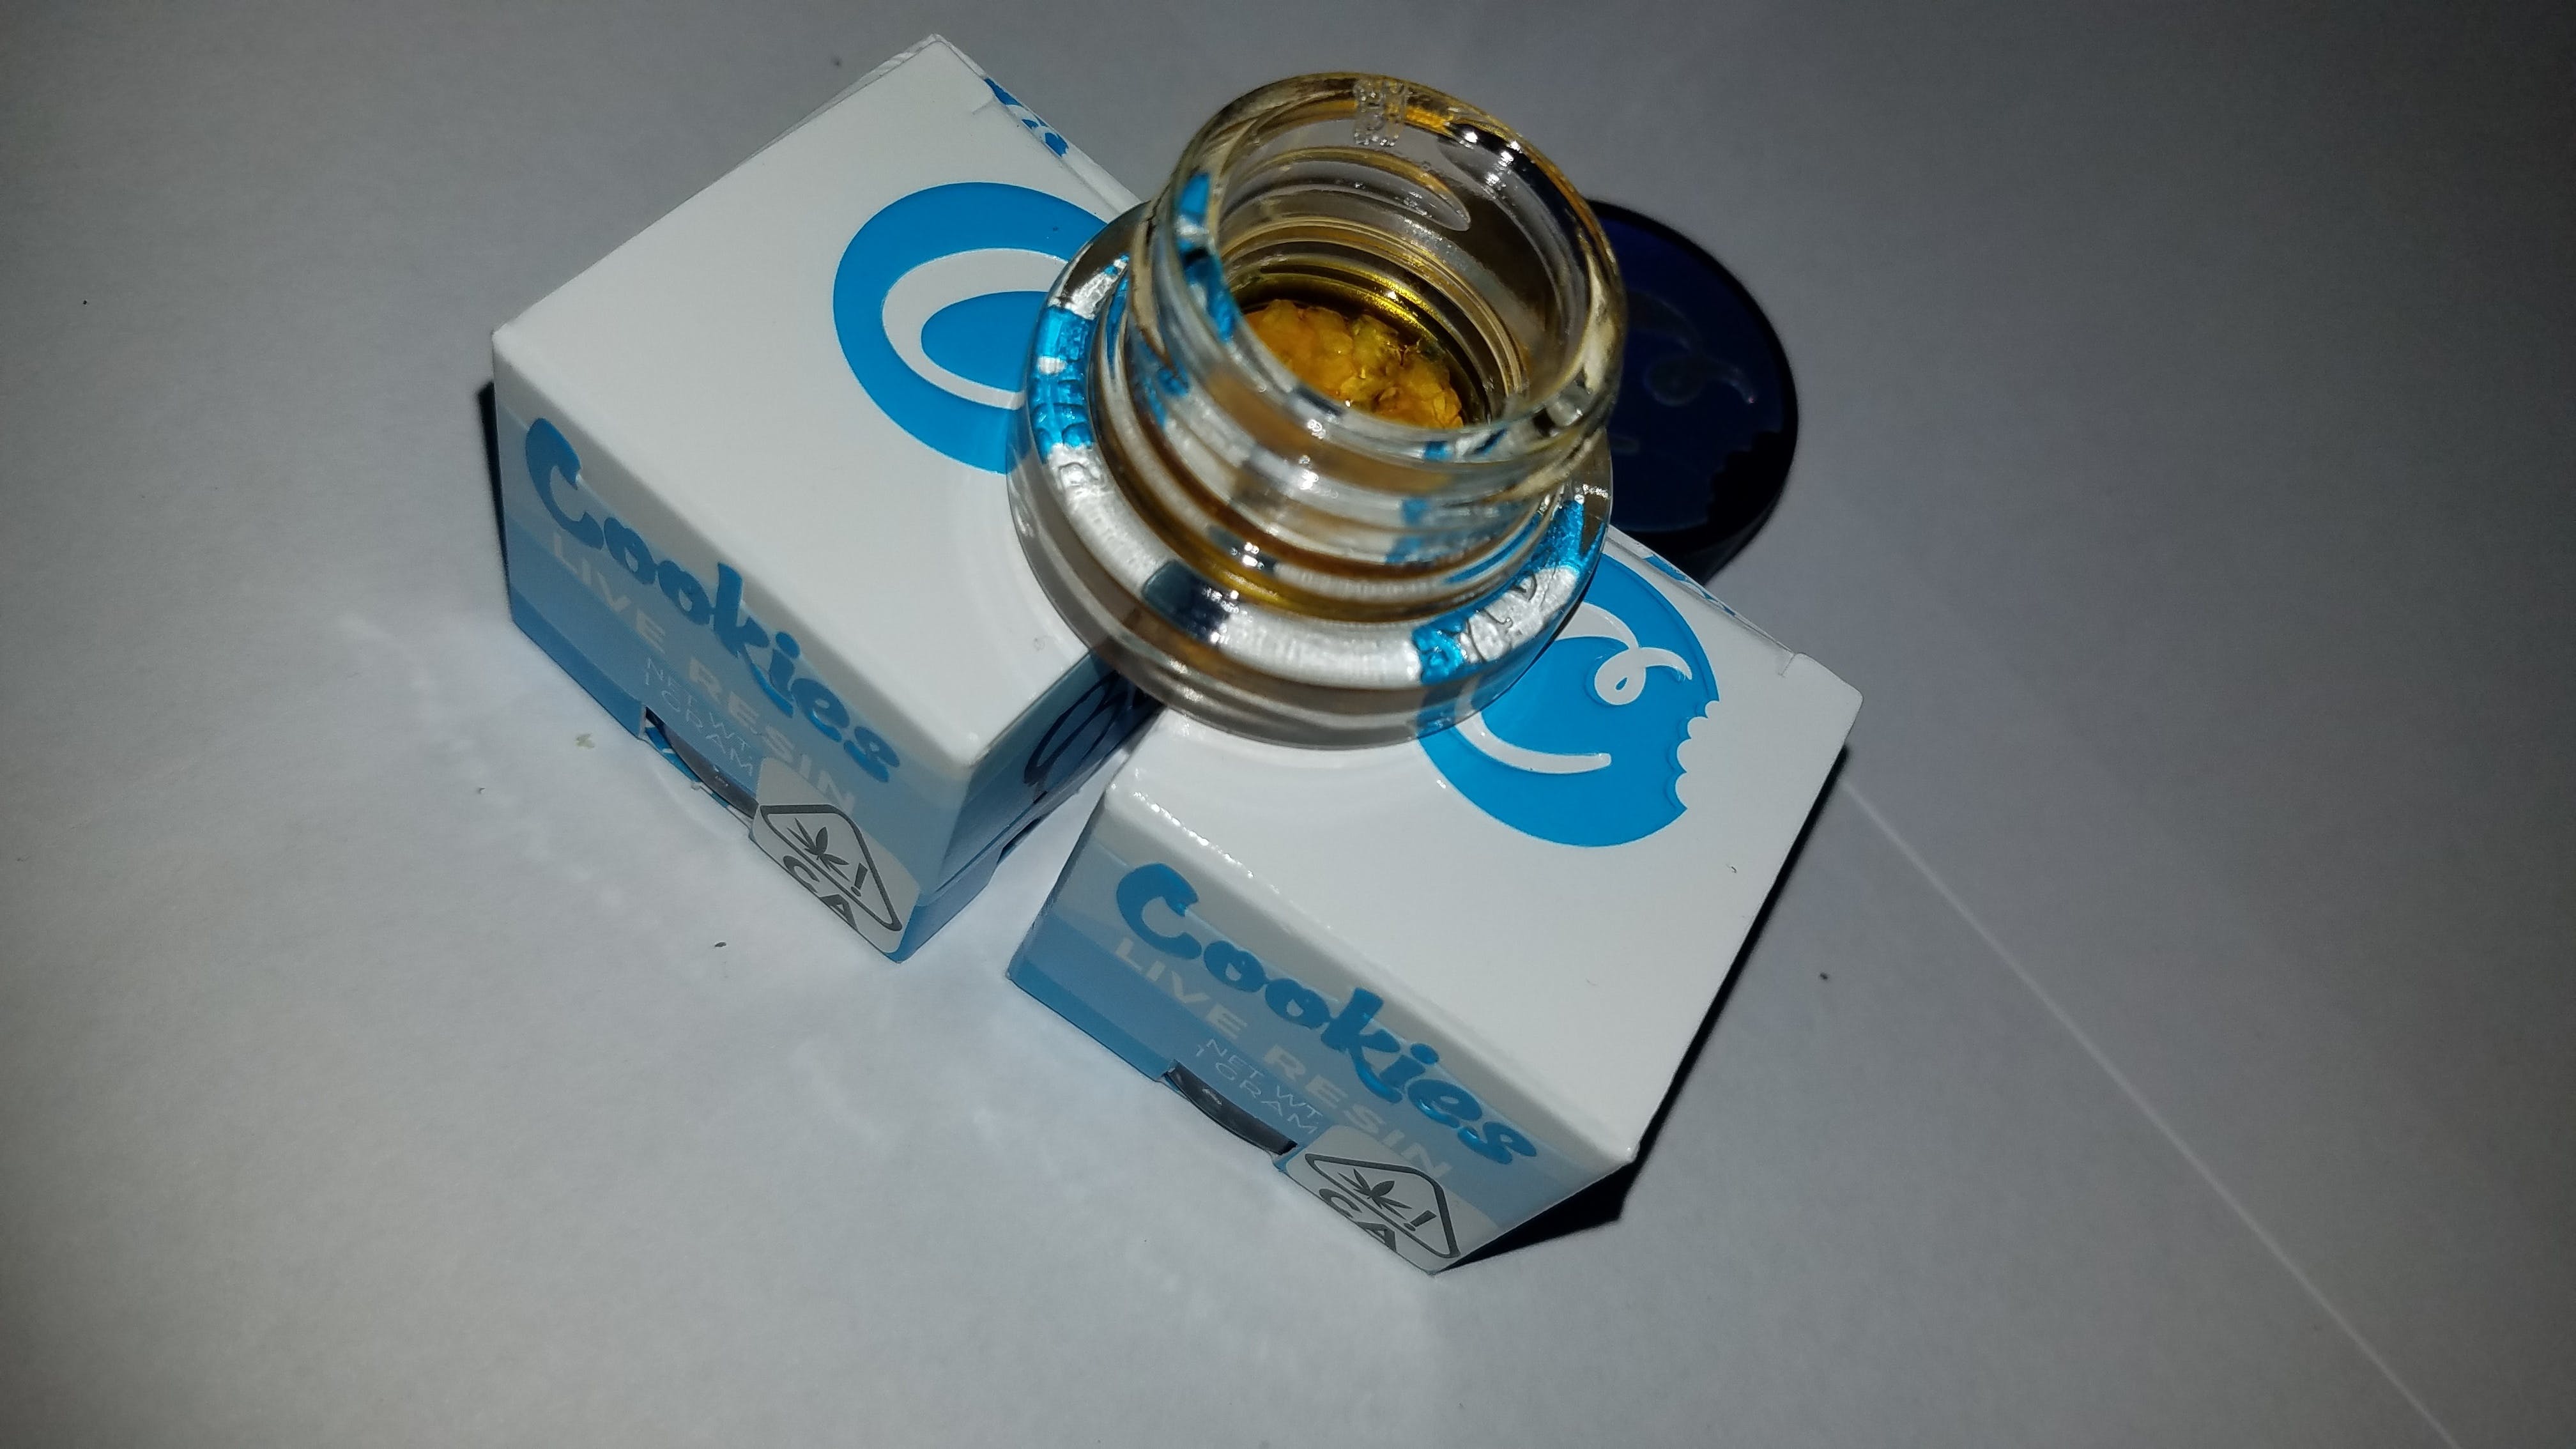 wax-live-resin-strains-by-cookies